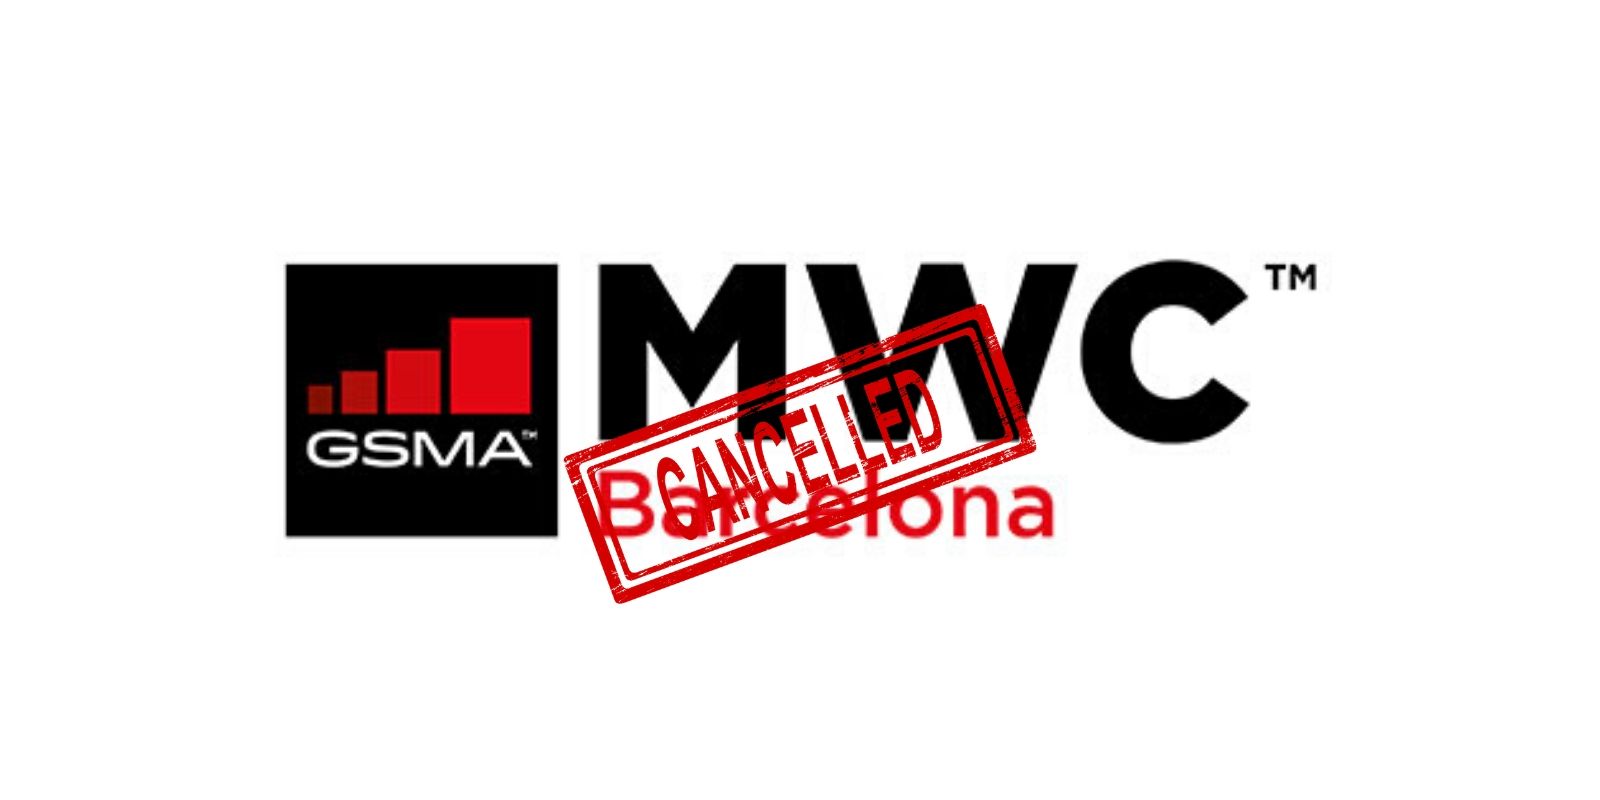 mwc 2020 cancelled